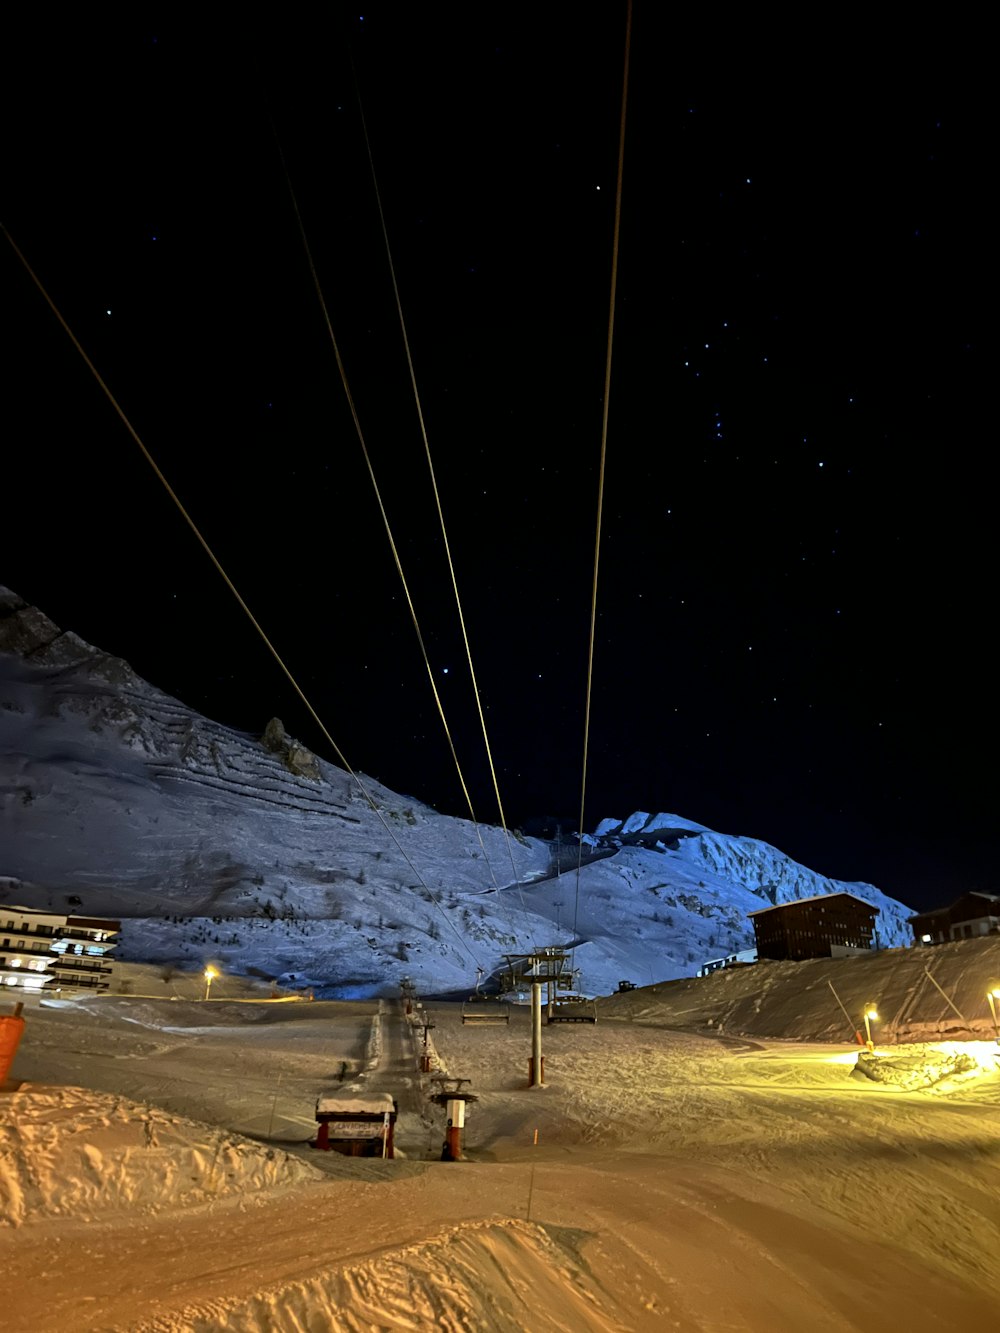 a ski lift going up a snowy mountain at night